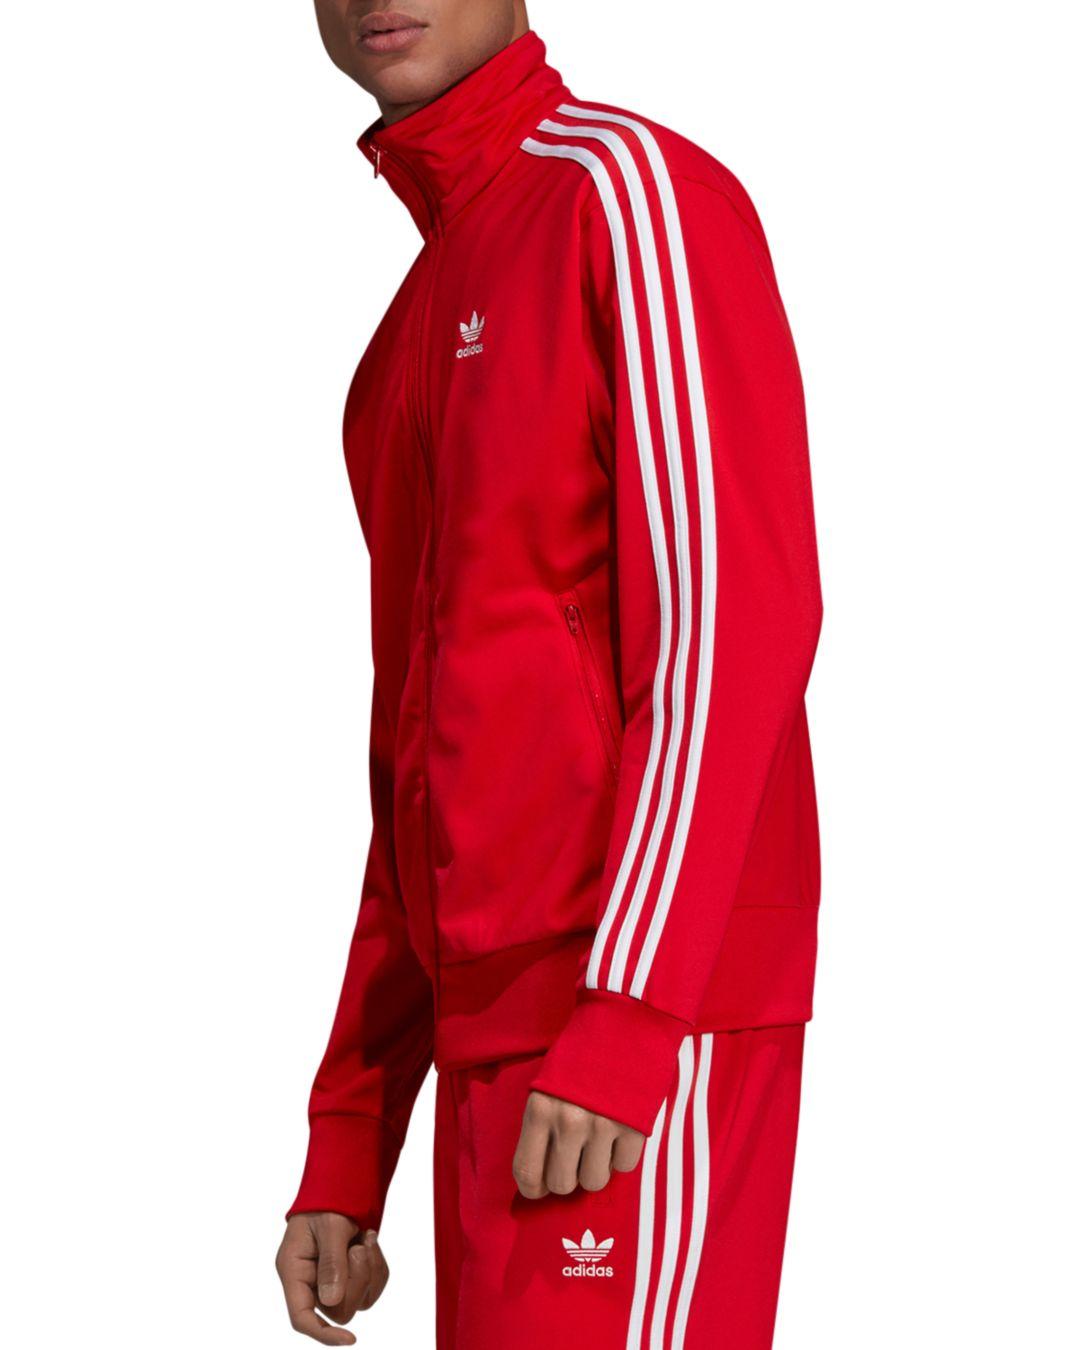 Buy > adidas firebird track jacket red > in stock